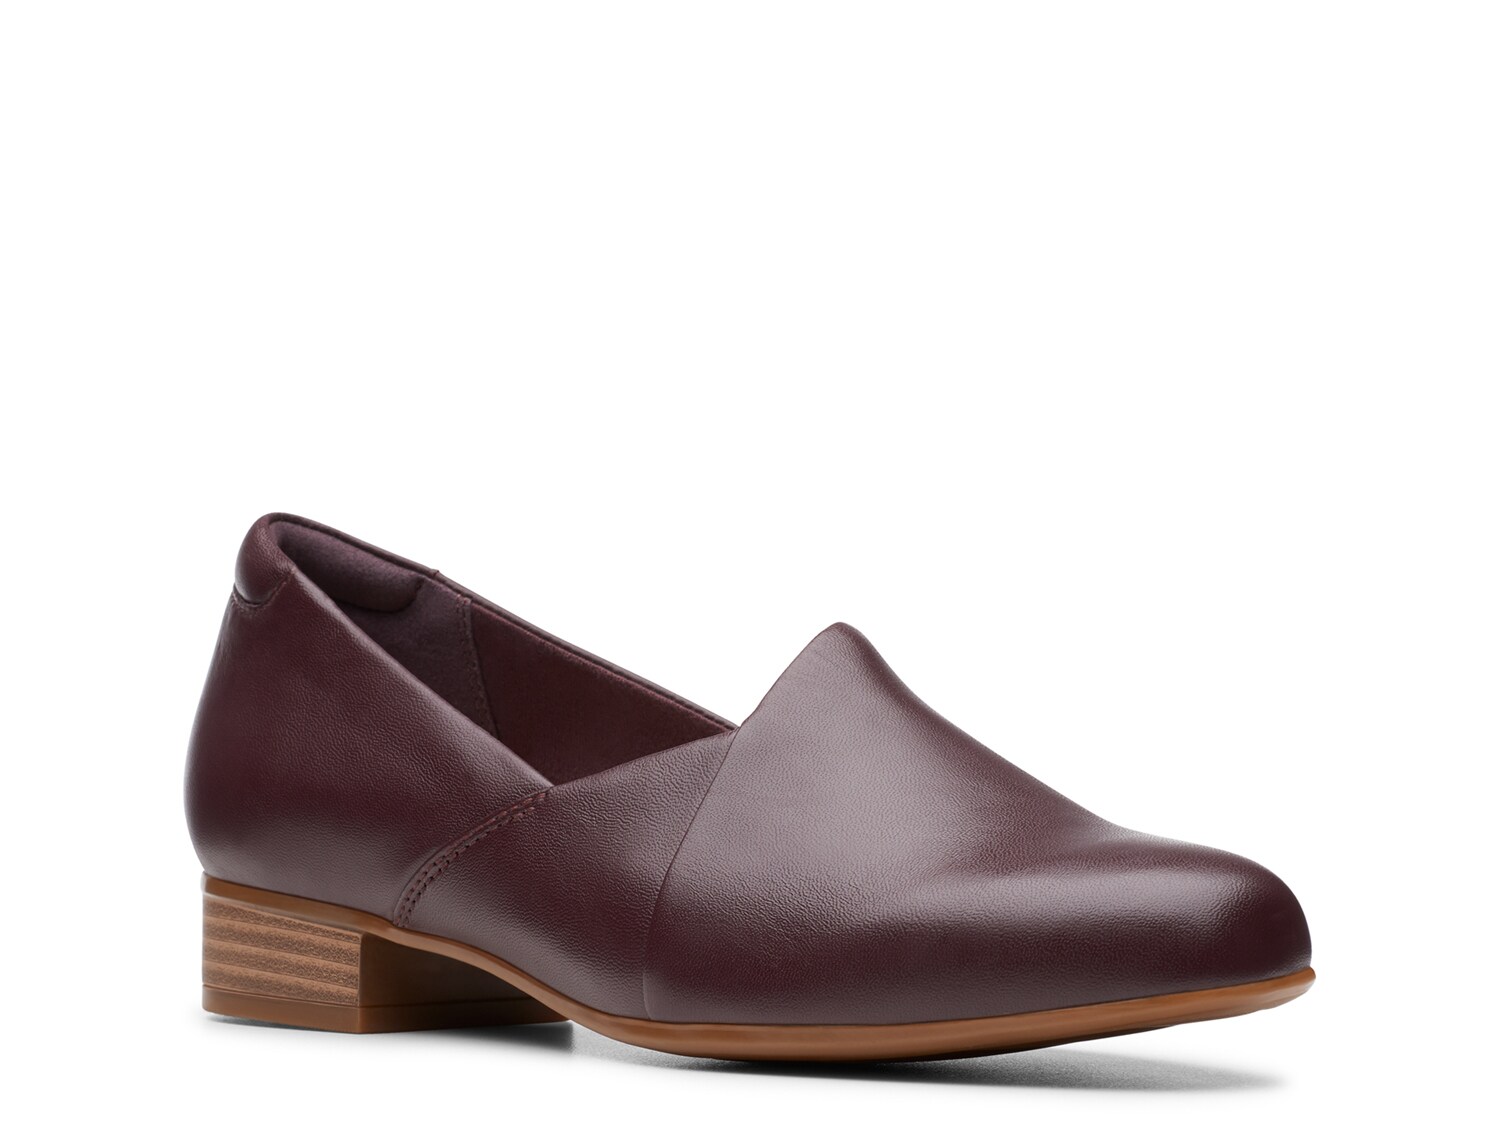 dsw womens shoes clarks